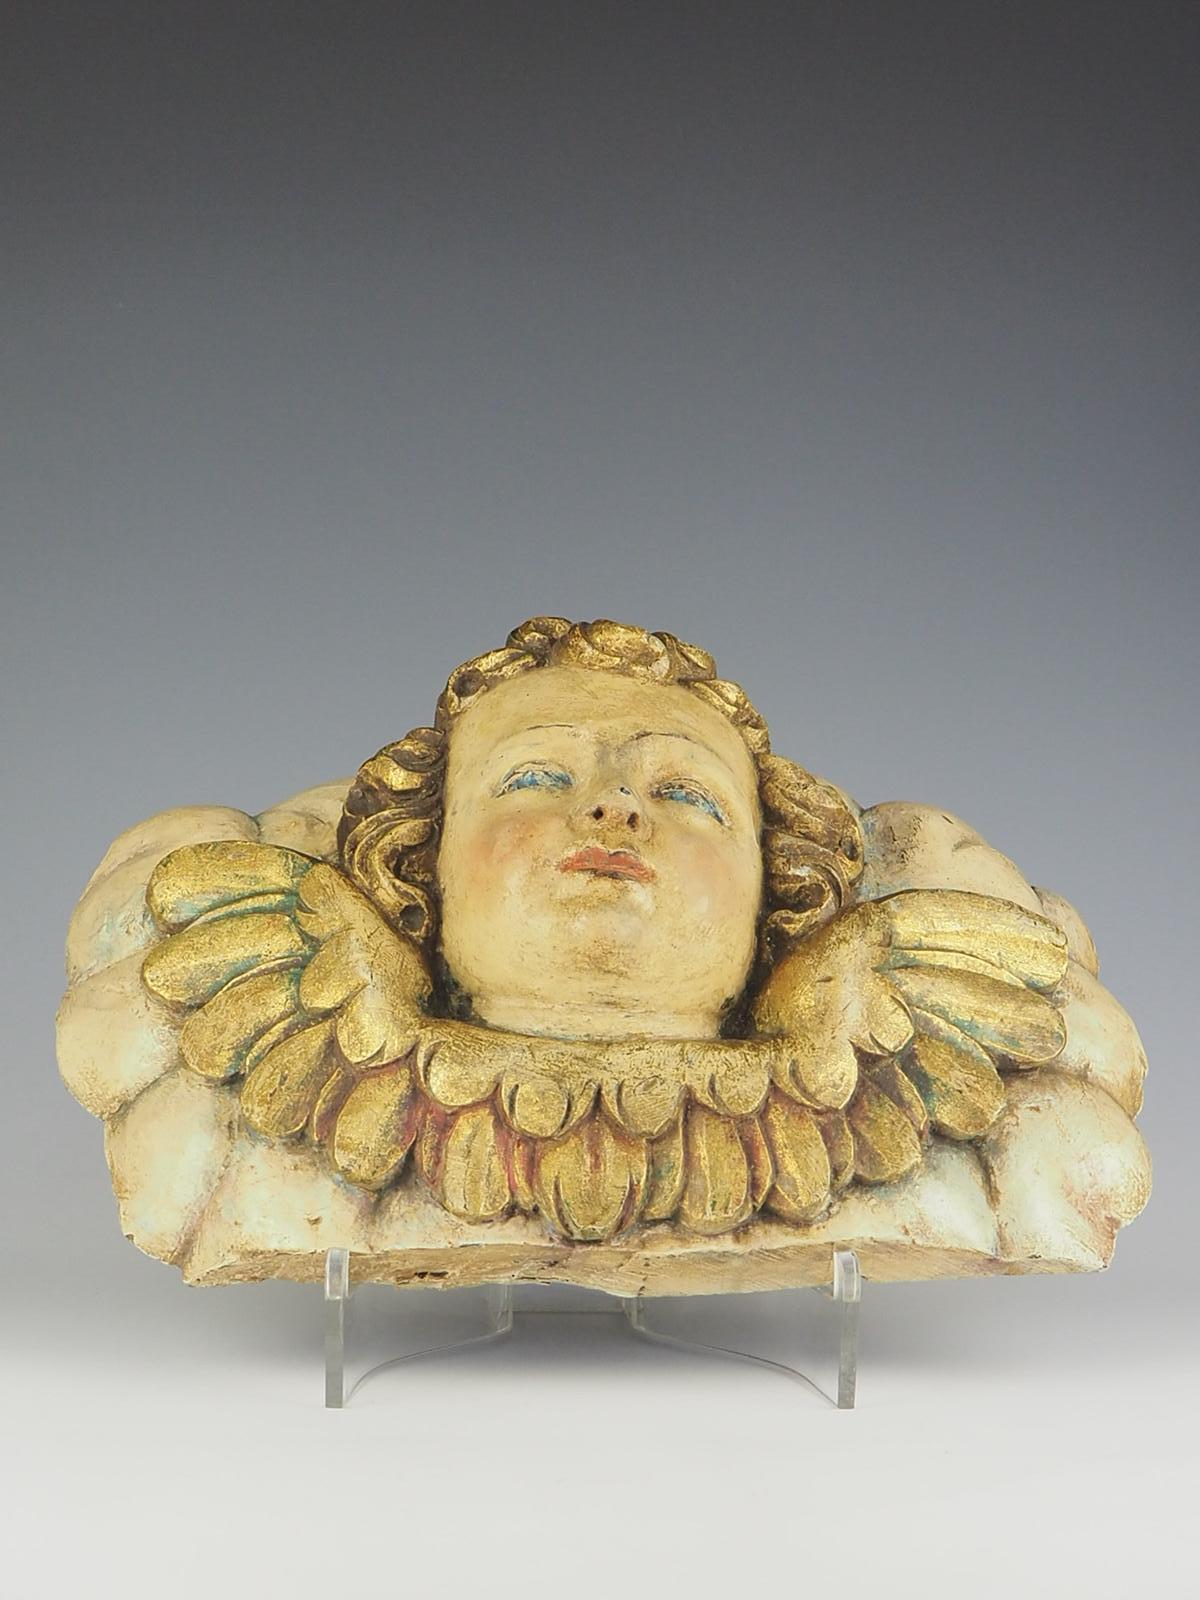 Polychromed 18th Century Carved Wood Panel – Polychrome Head Of Cherub – Putto For Sale